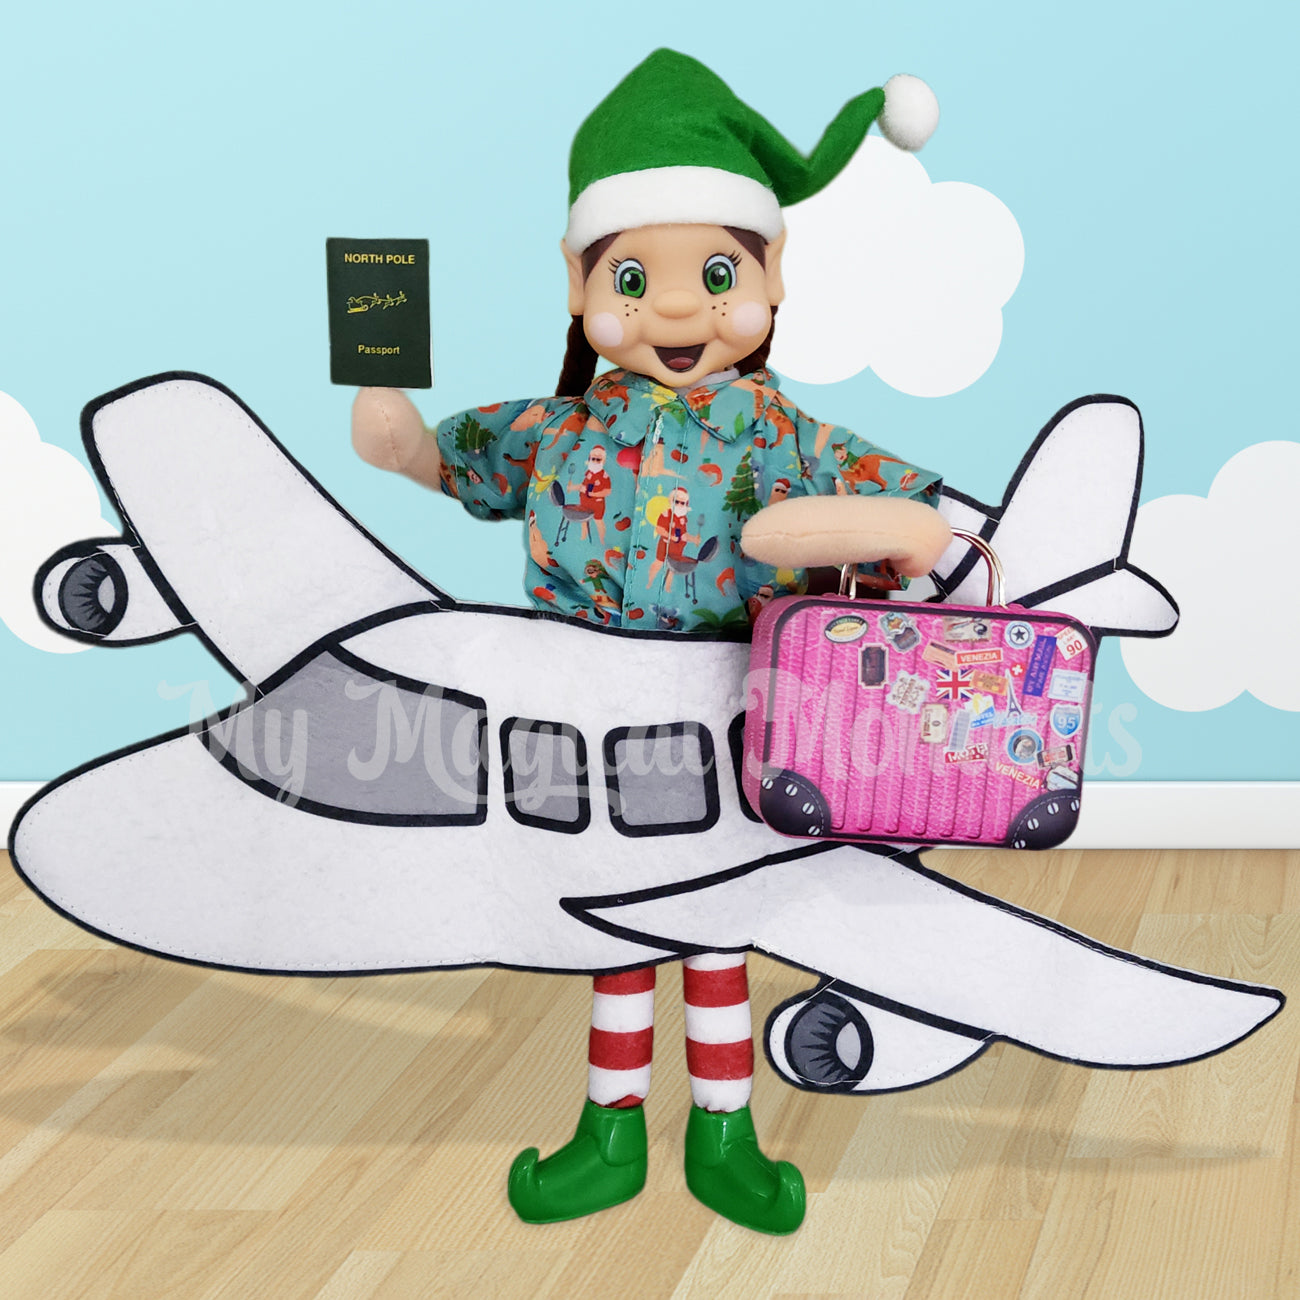 My Elf friends standing holding a printable passport in a aeroplane costume with their pink suitcase prop